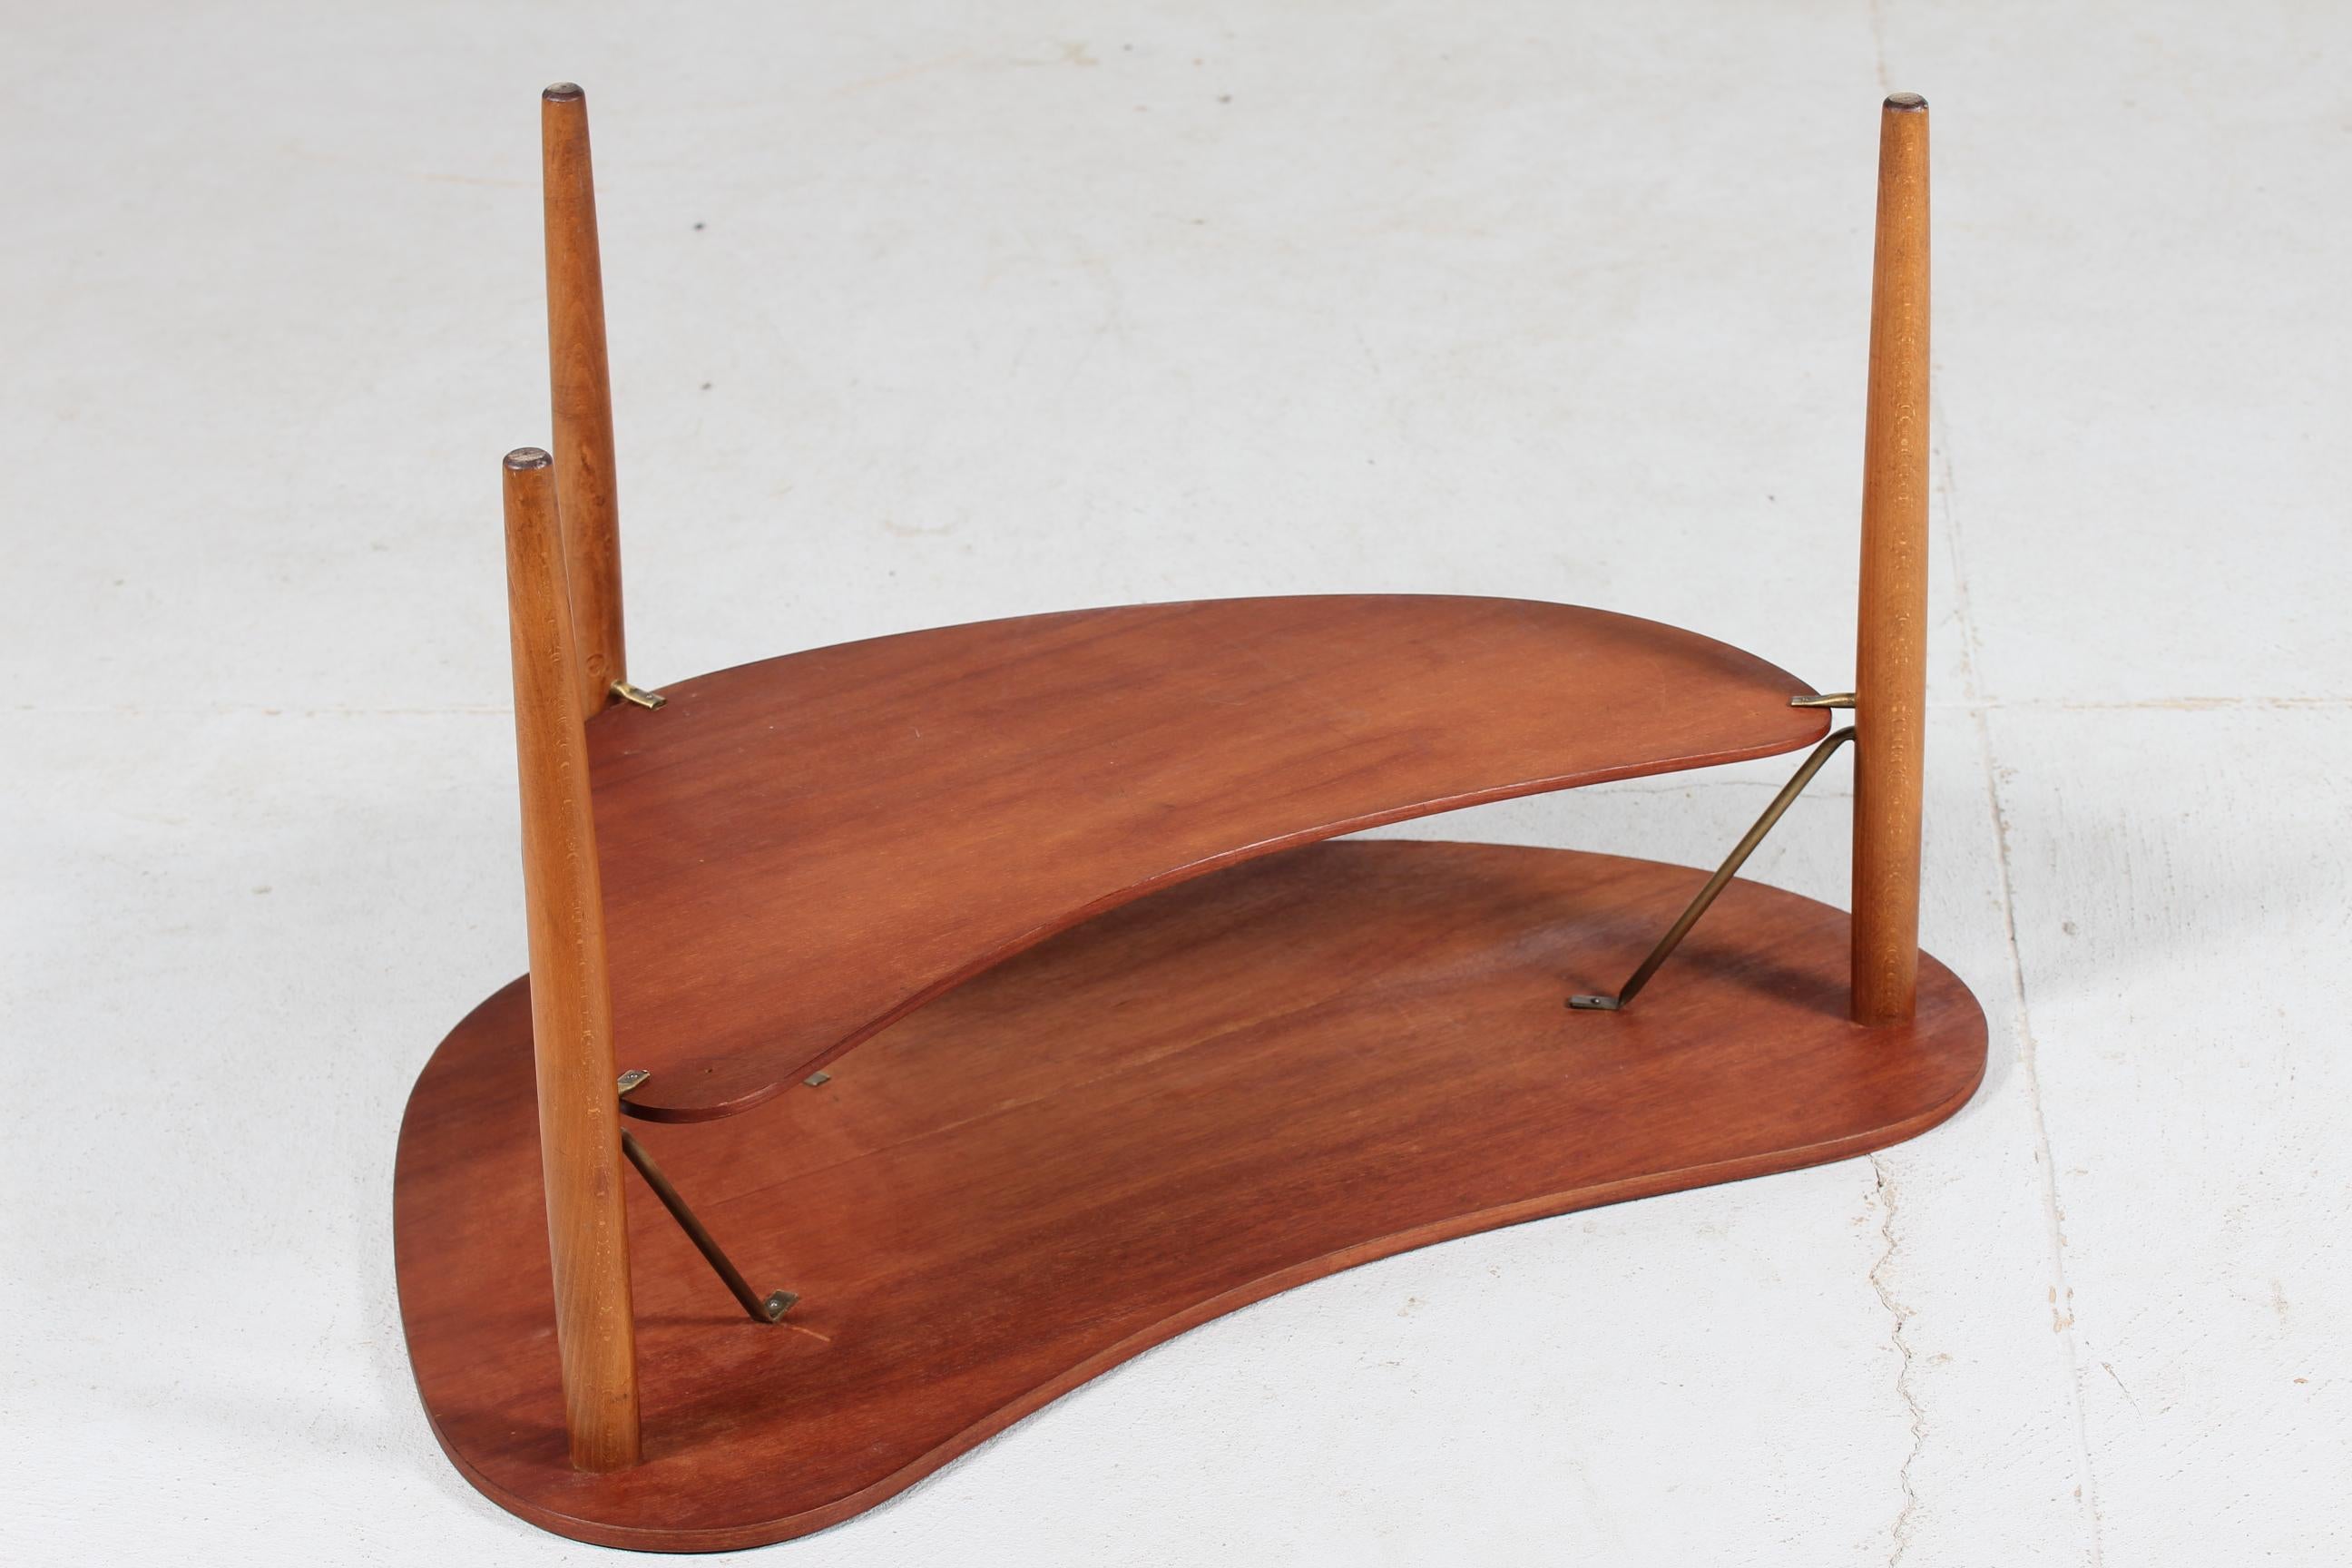 Danish Modern Organically Shaped Coffee Table of Teak and Beech, Denmark, 1950s For Sale 2